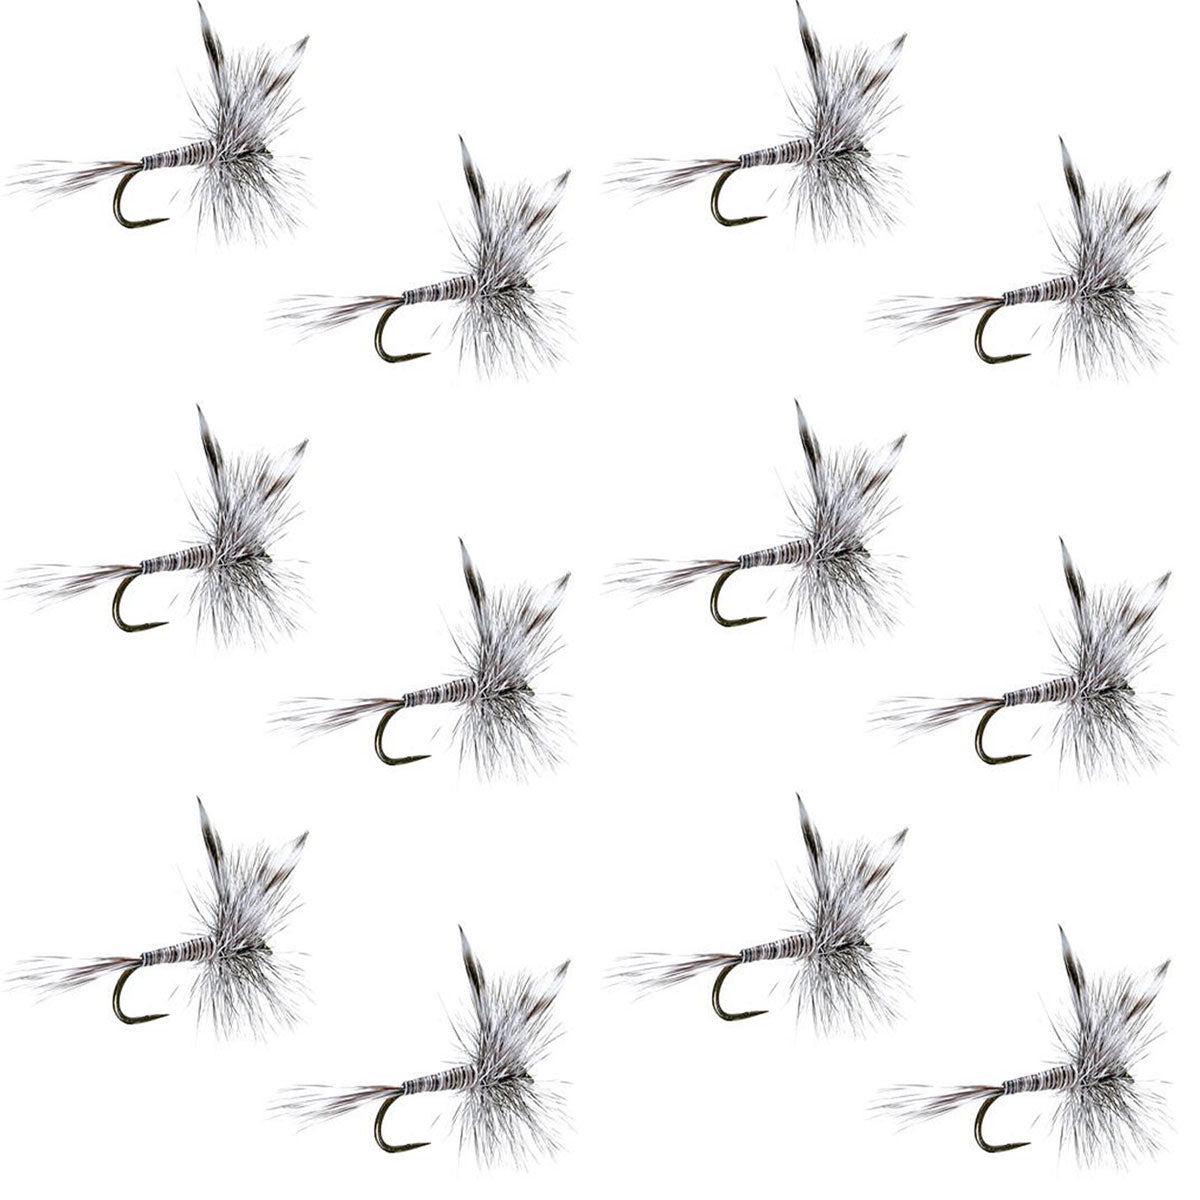 Barbless Mosquito Classic Trout Dry Fly Fishing 1 Dozen Flies - Hook Size 18